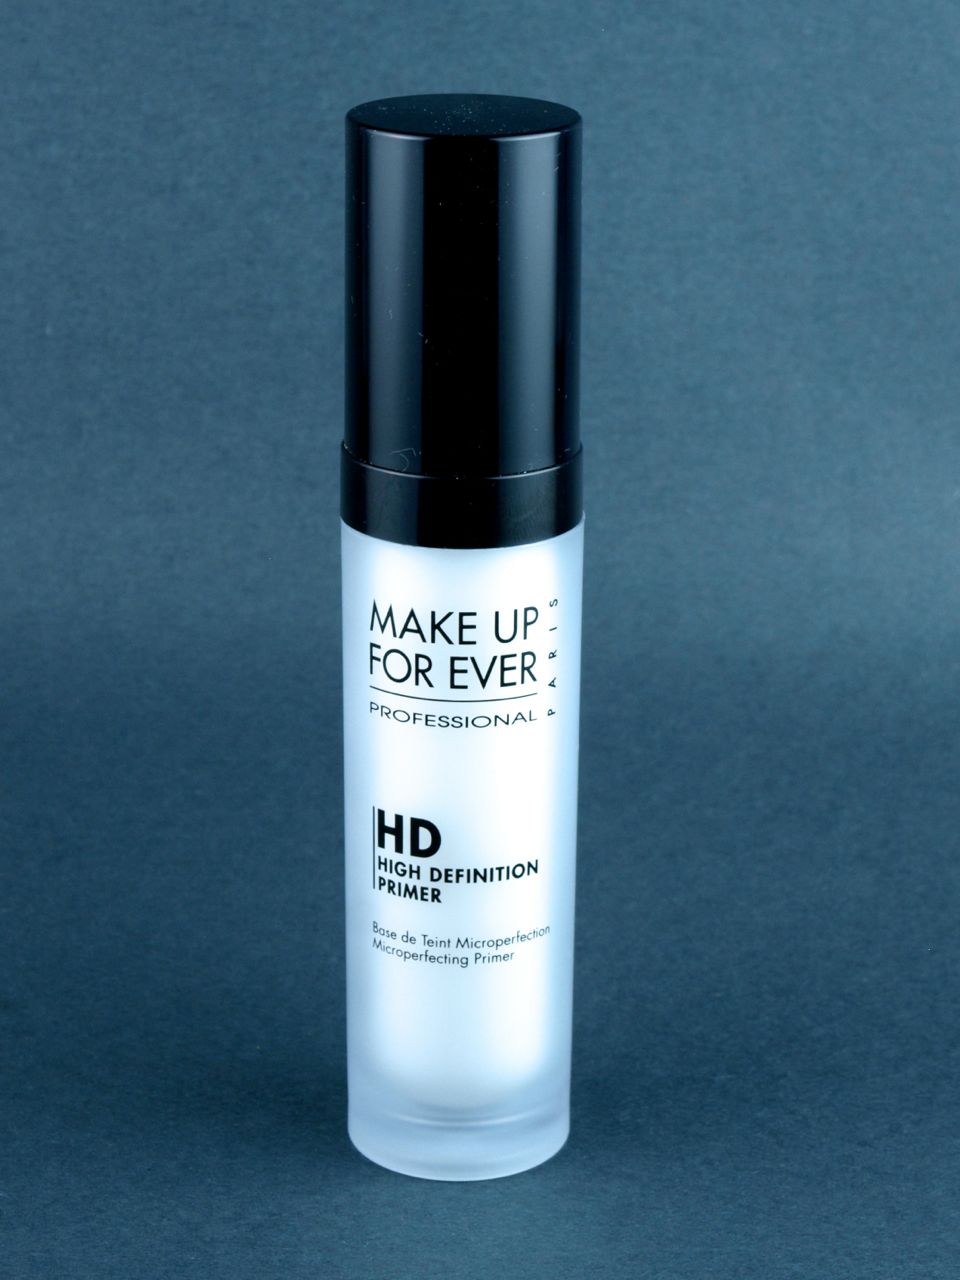 MAKE UP FOR EVER Primers Review